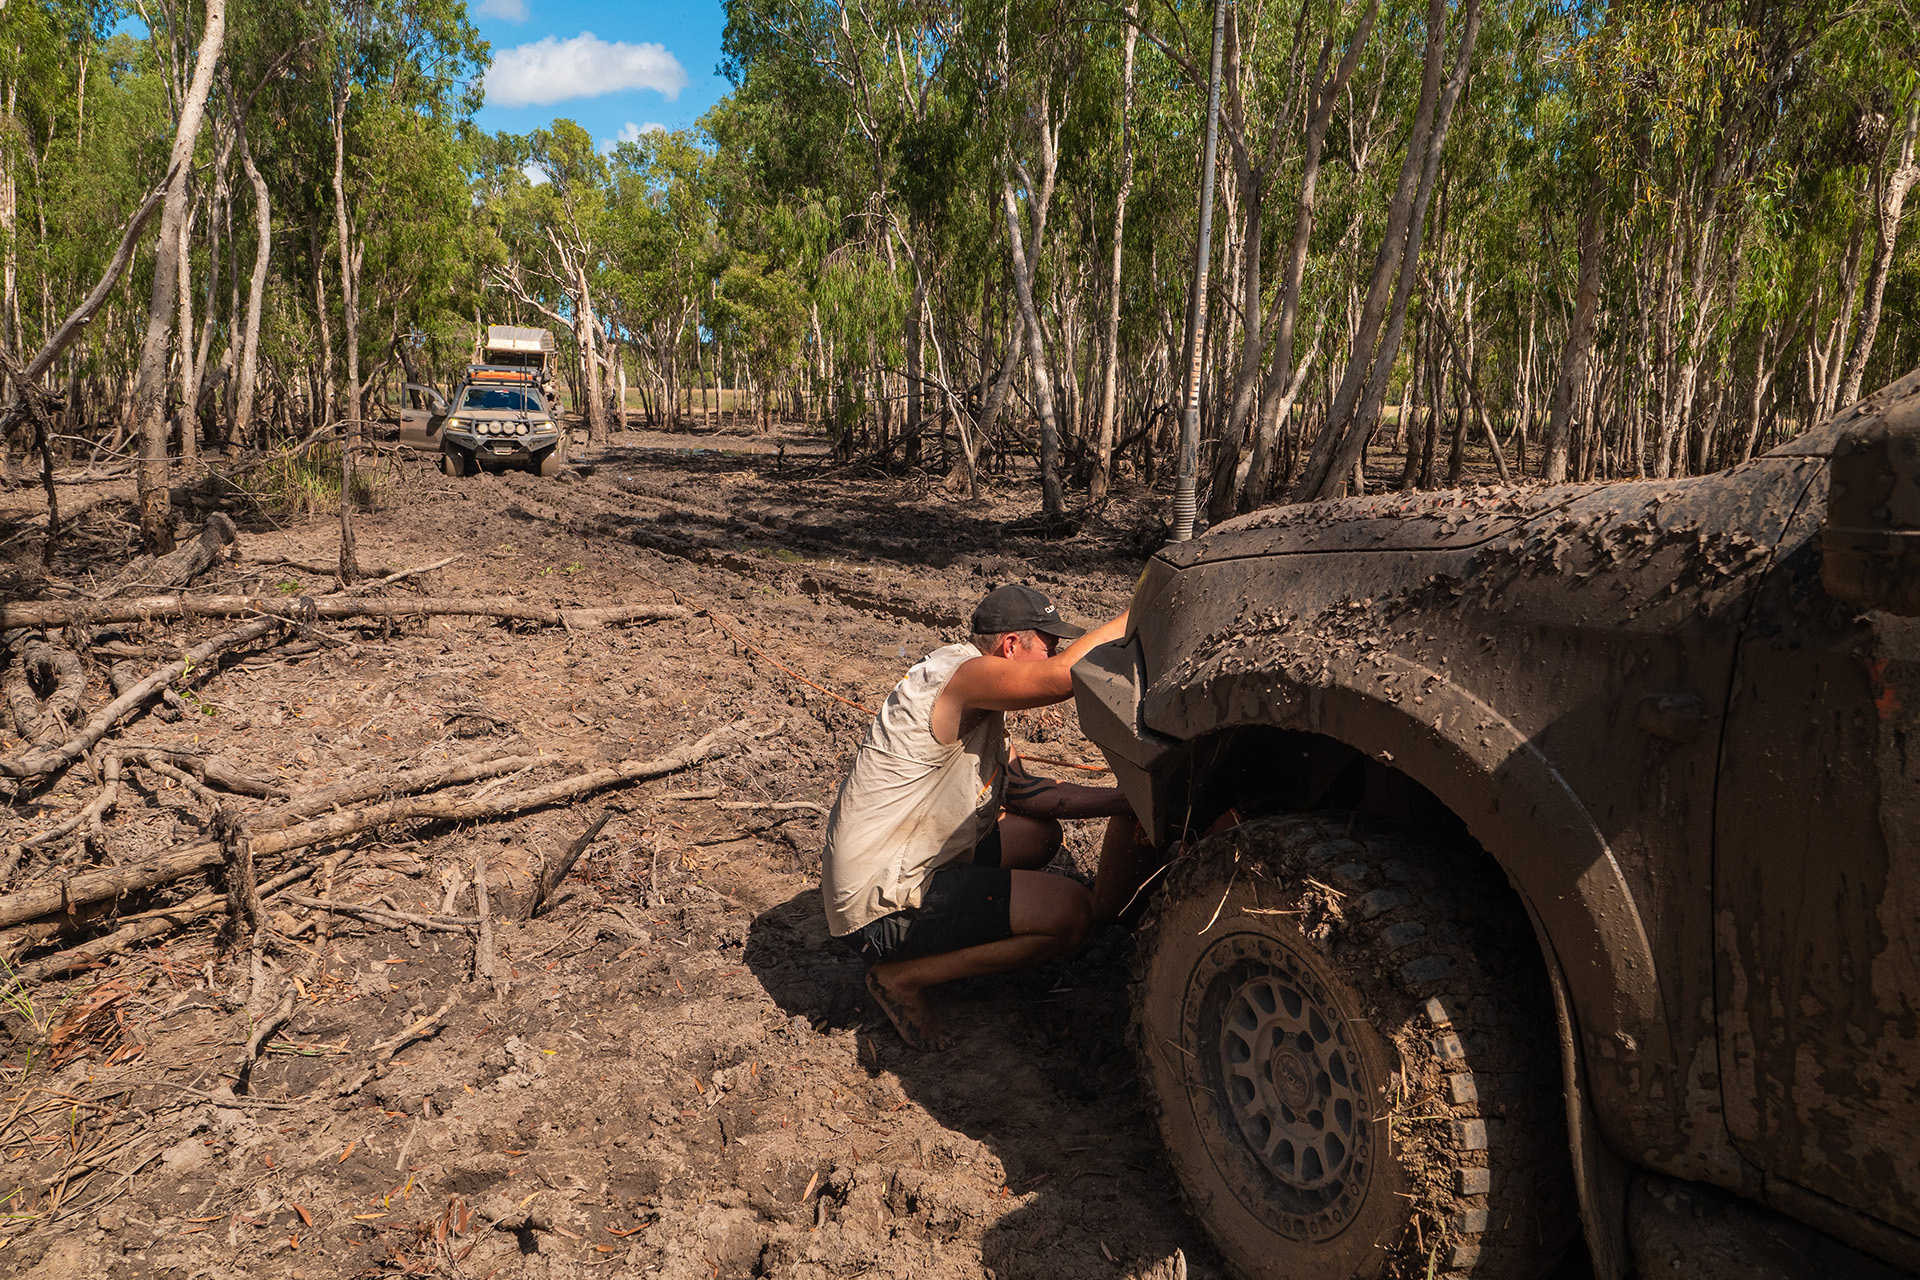 All 4 Adventure LC200 and D-Max on Assault wheels bogged in muddy track